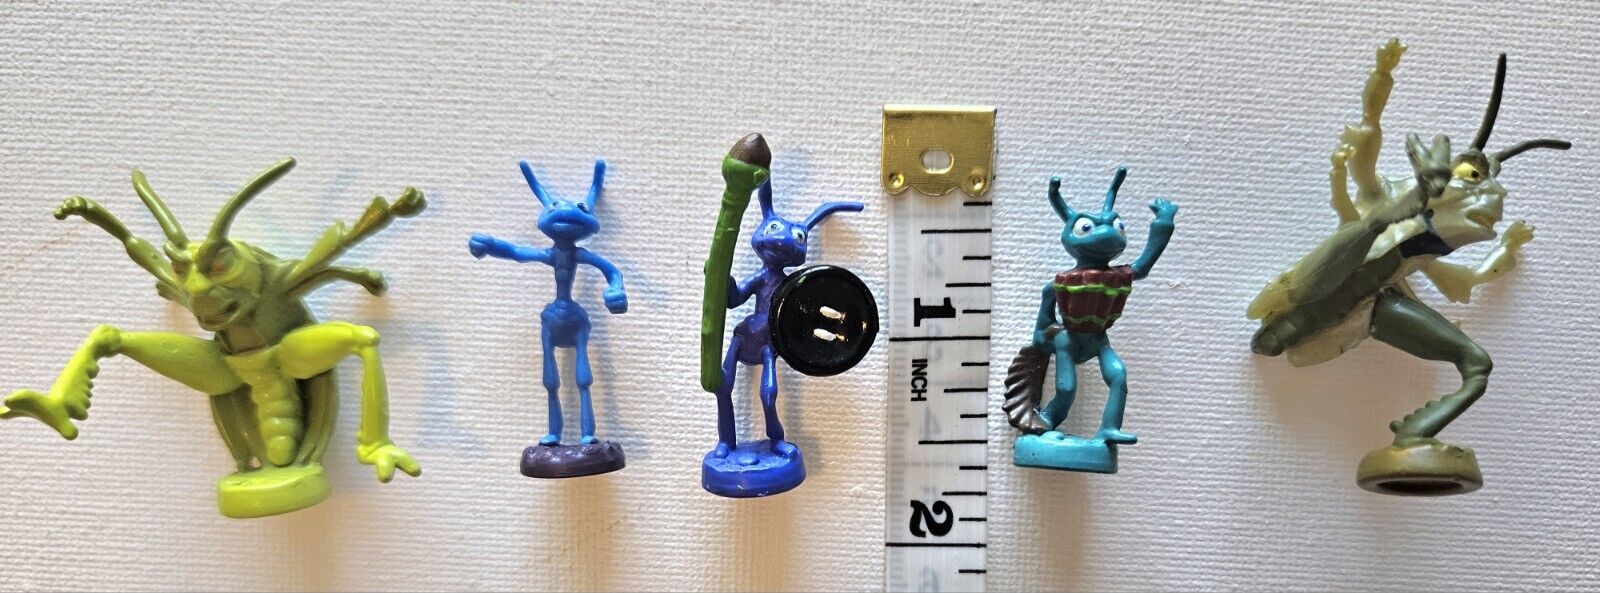 Vintage Lot of 5 Disney Pixar A Bugs Life Characters Toys Mini Action Figures 